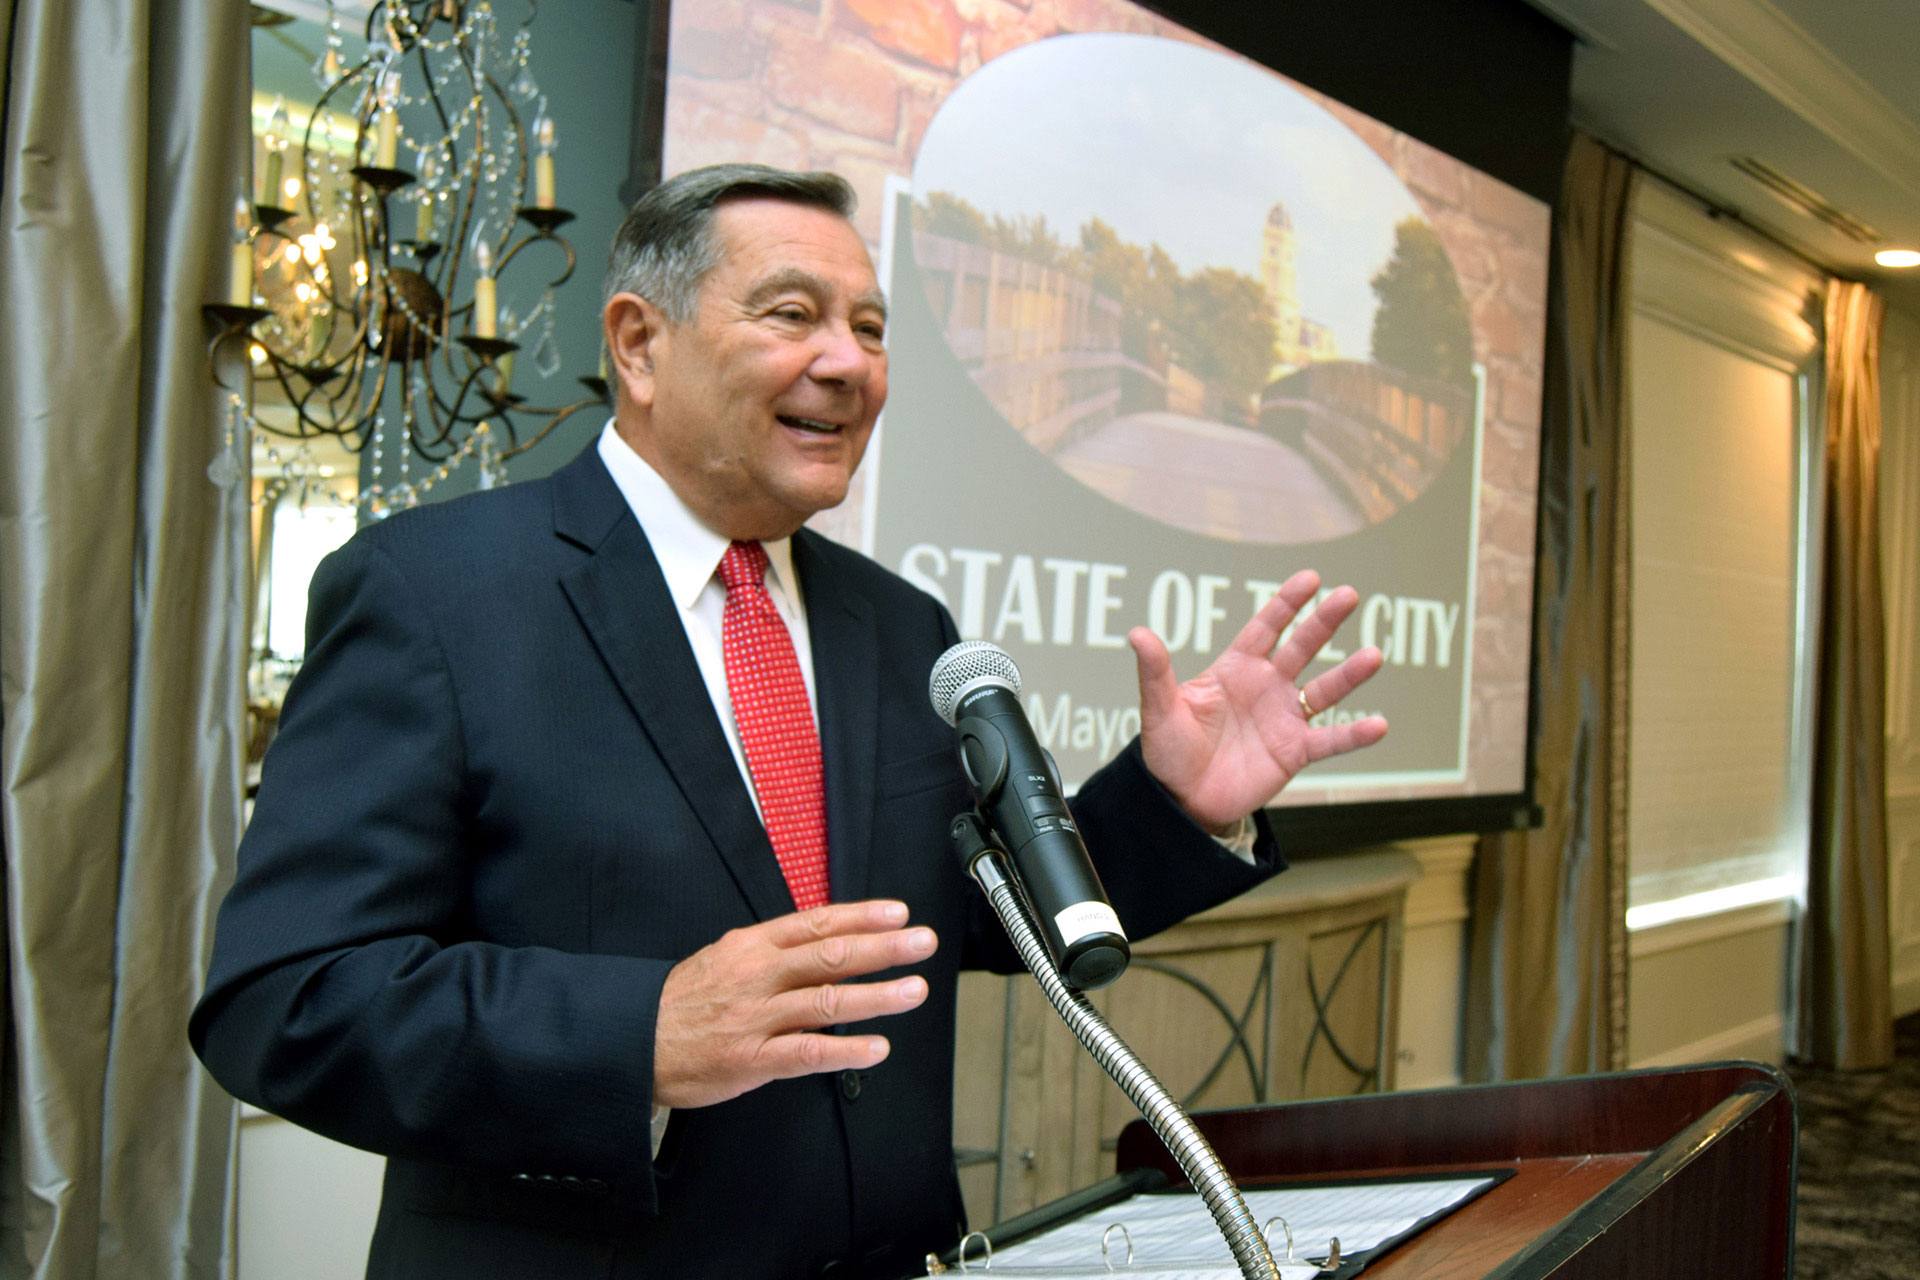 Mayor Ditslear Delivers Annual ‘State of the City’ Address